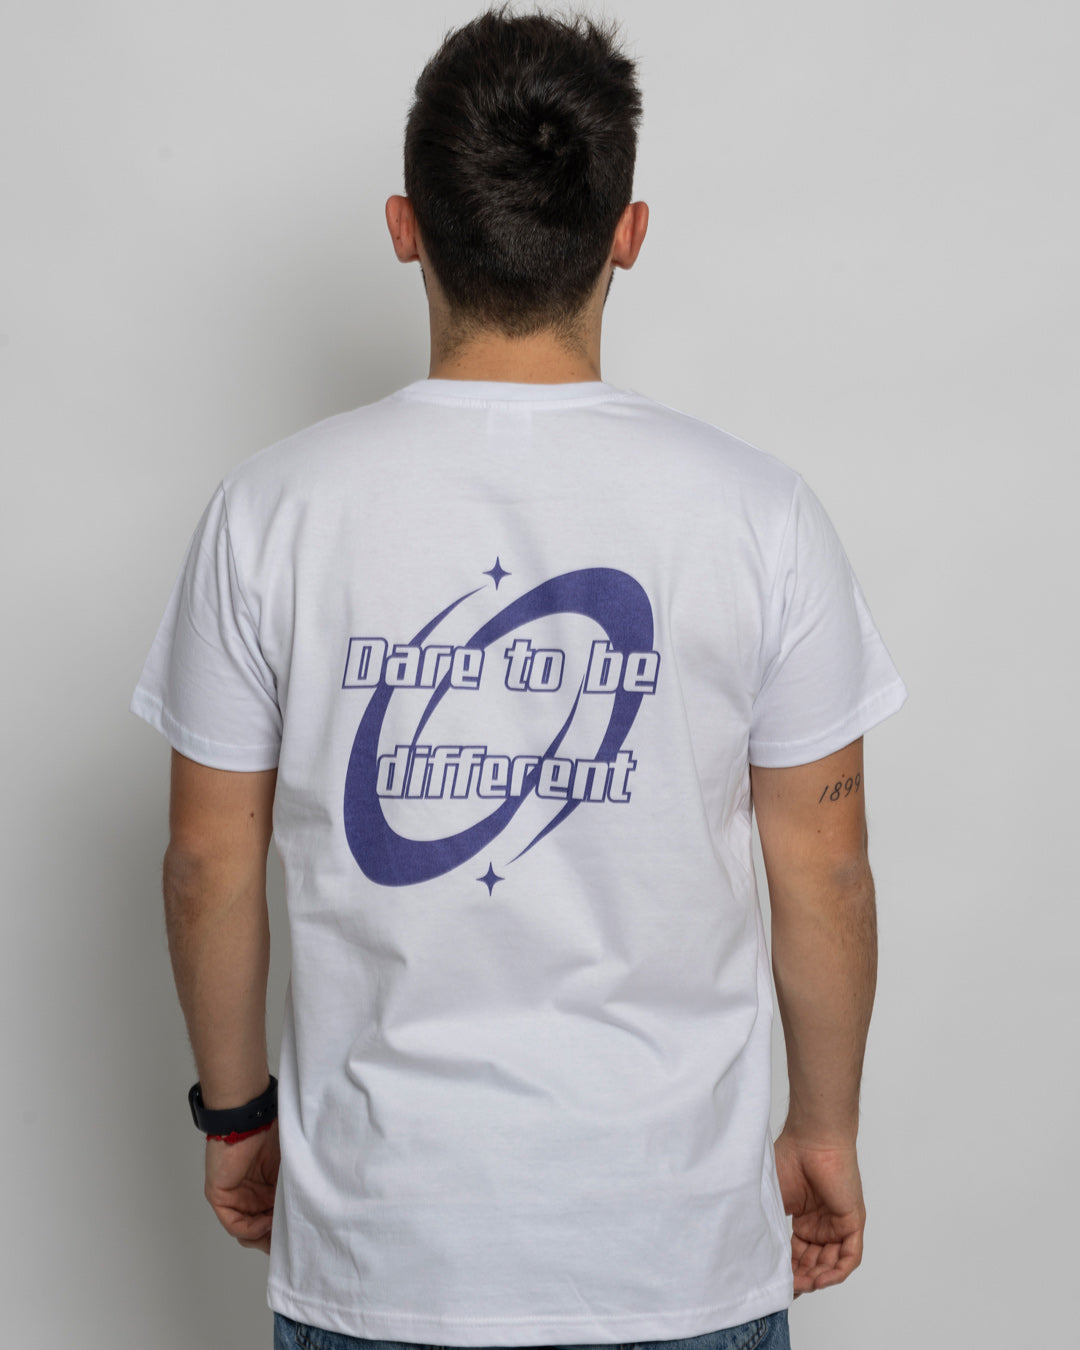 DARE TO BE DIFFERENT TEE